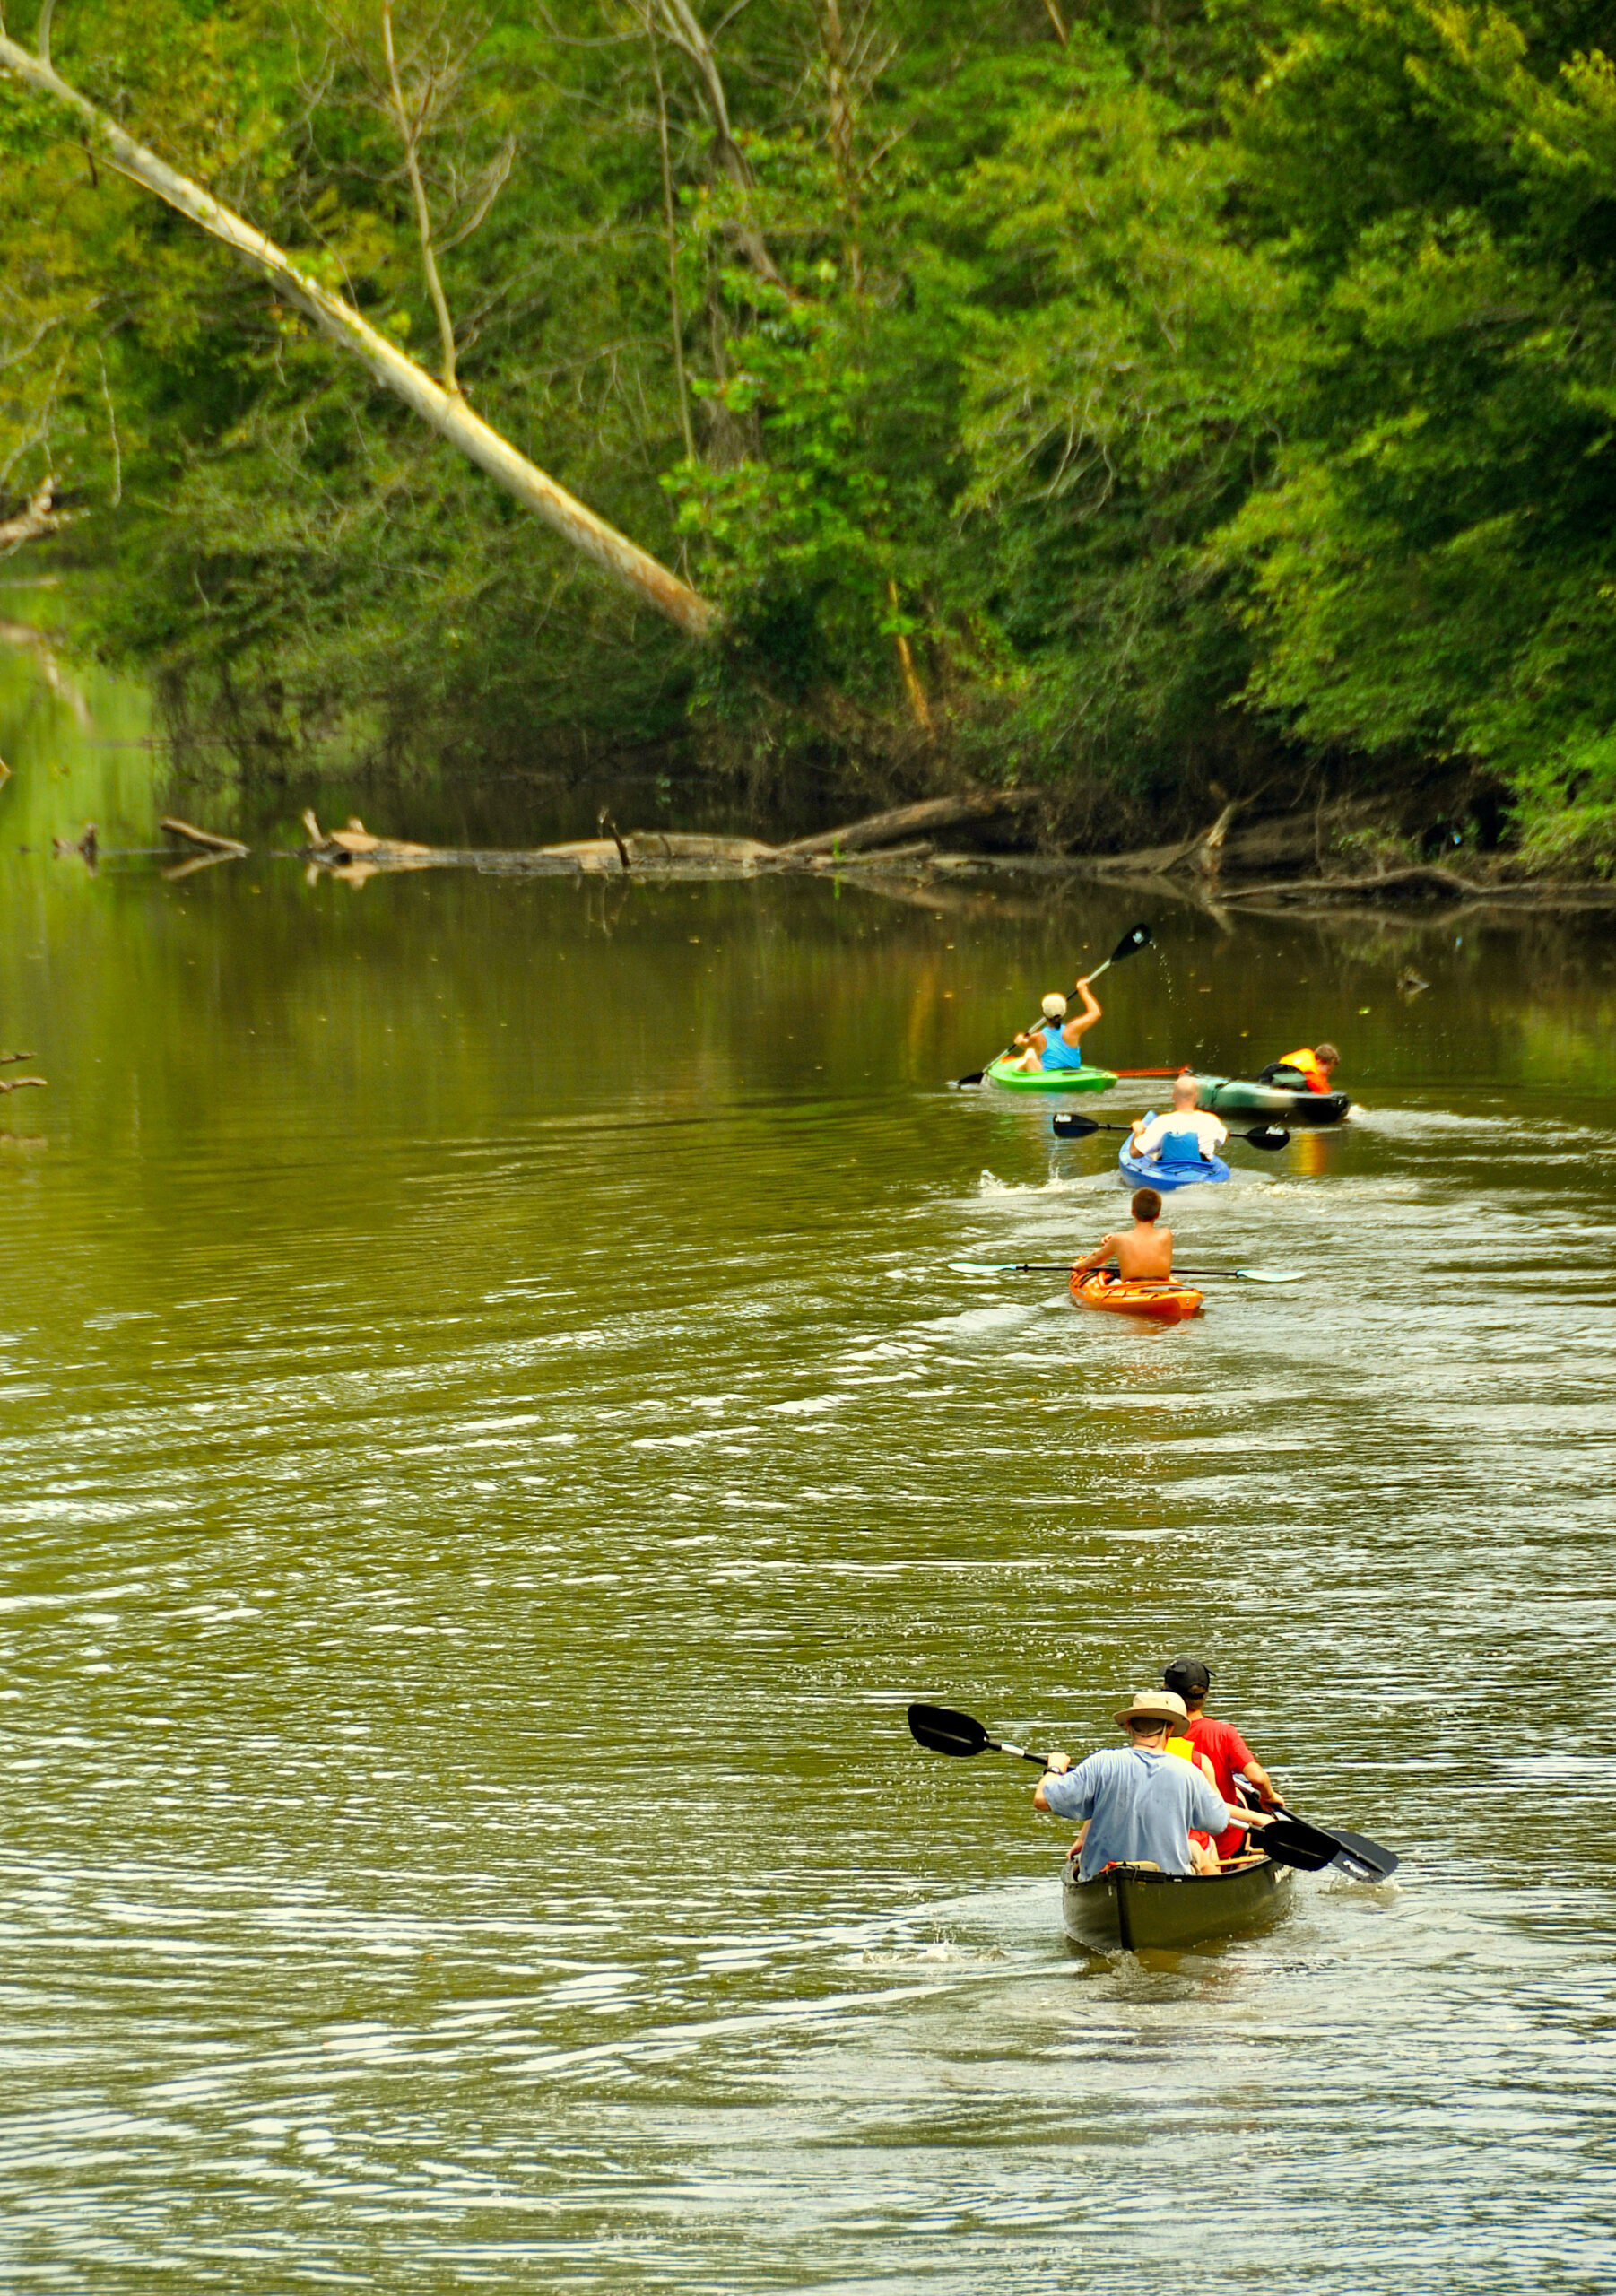 A line of kayakers paddling along a river